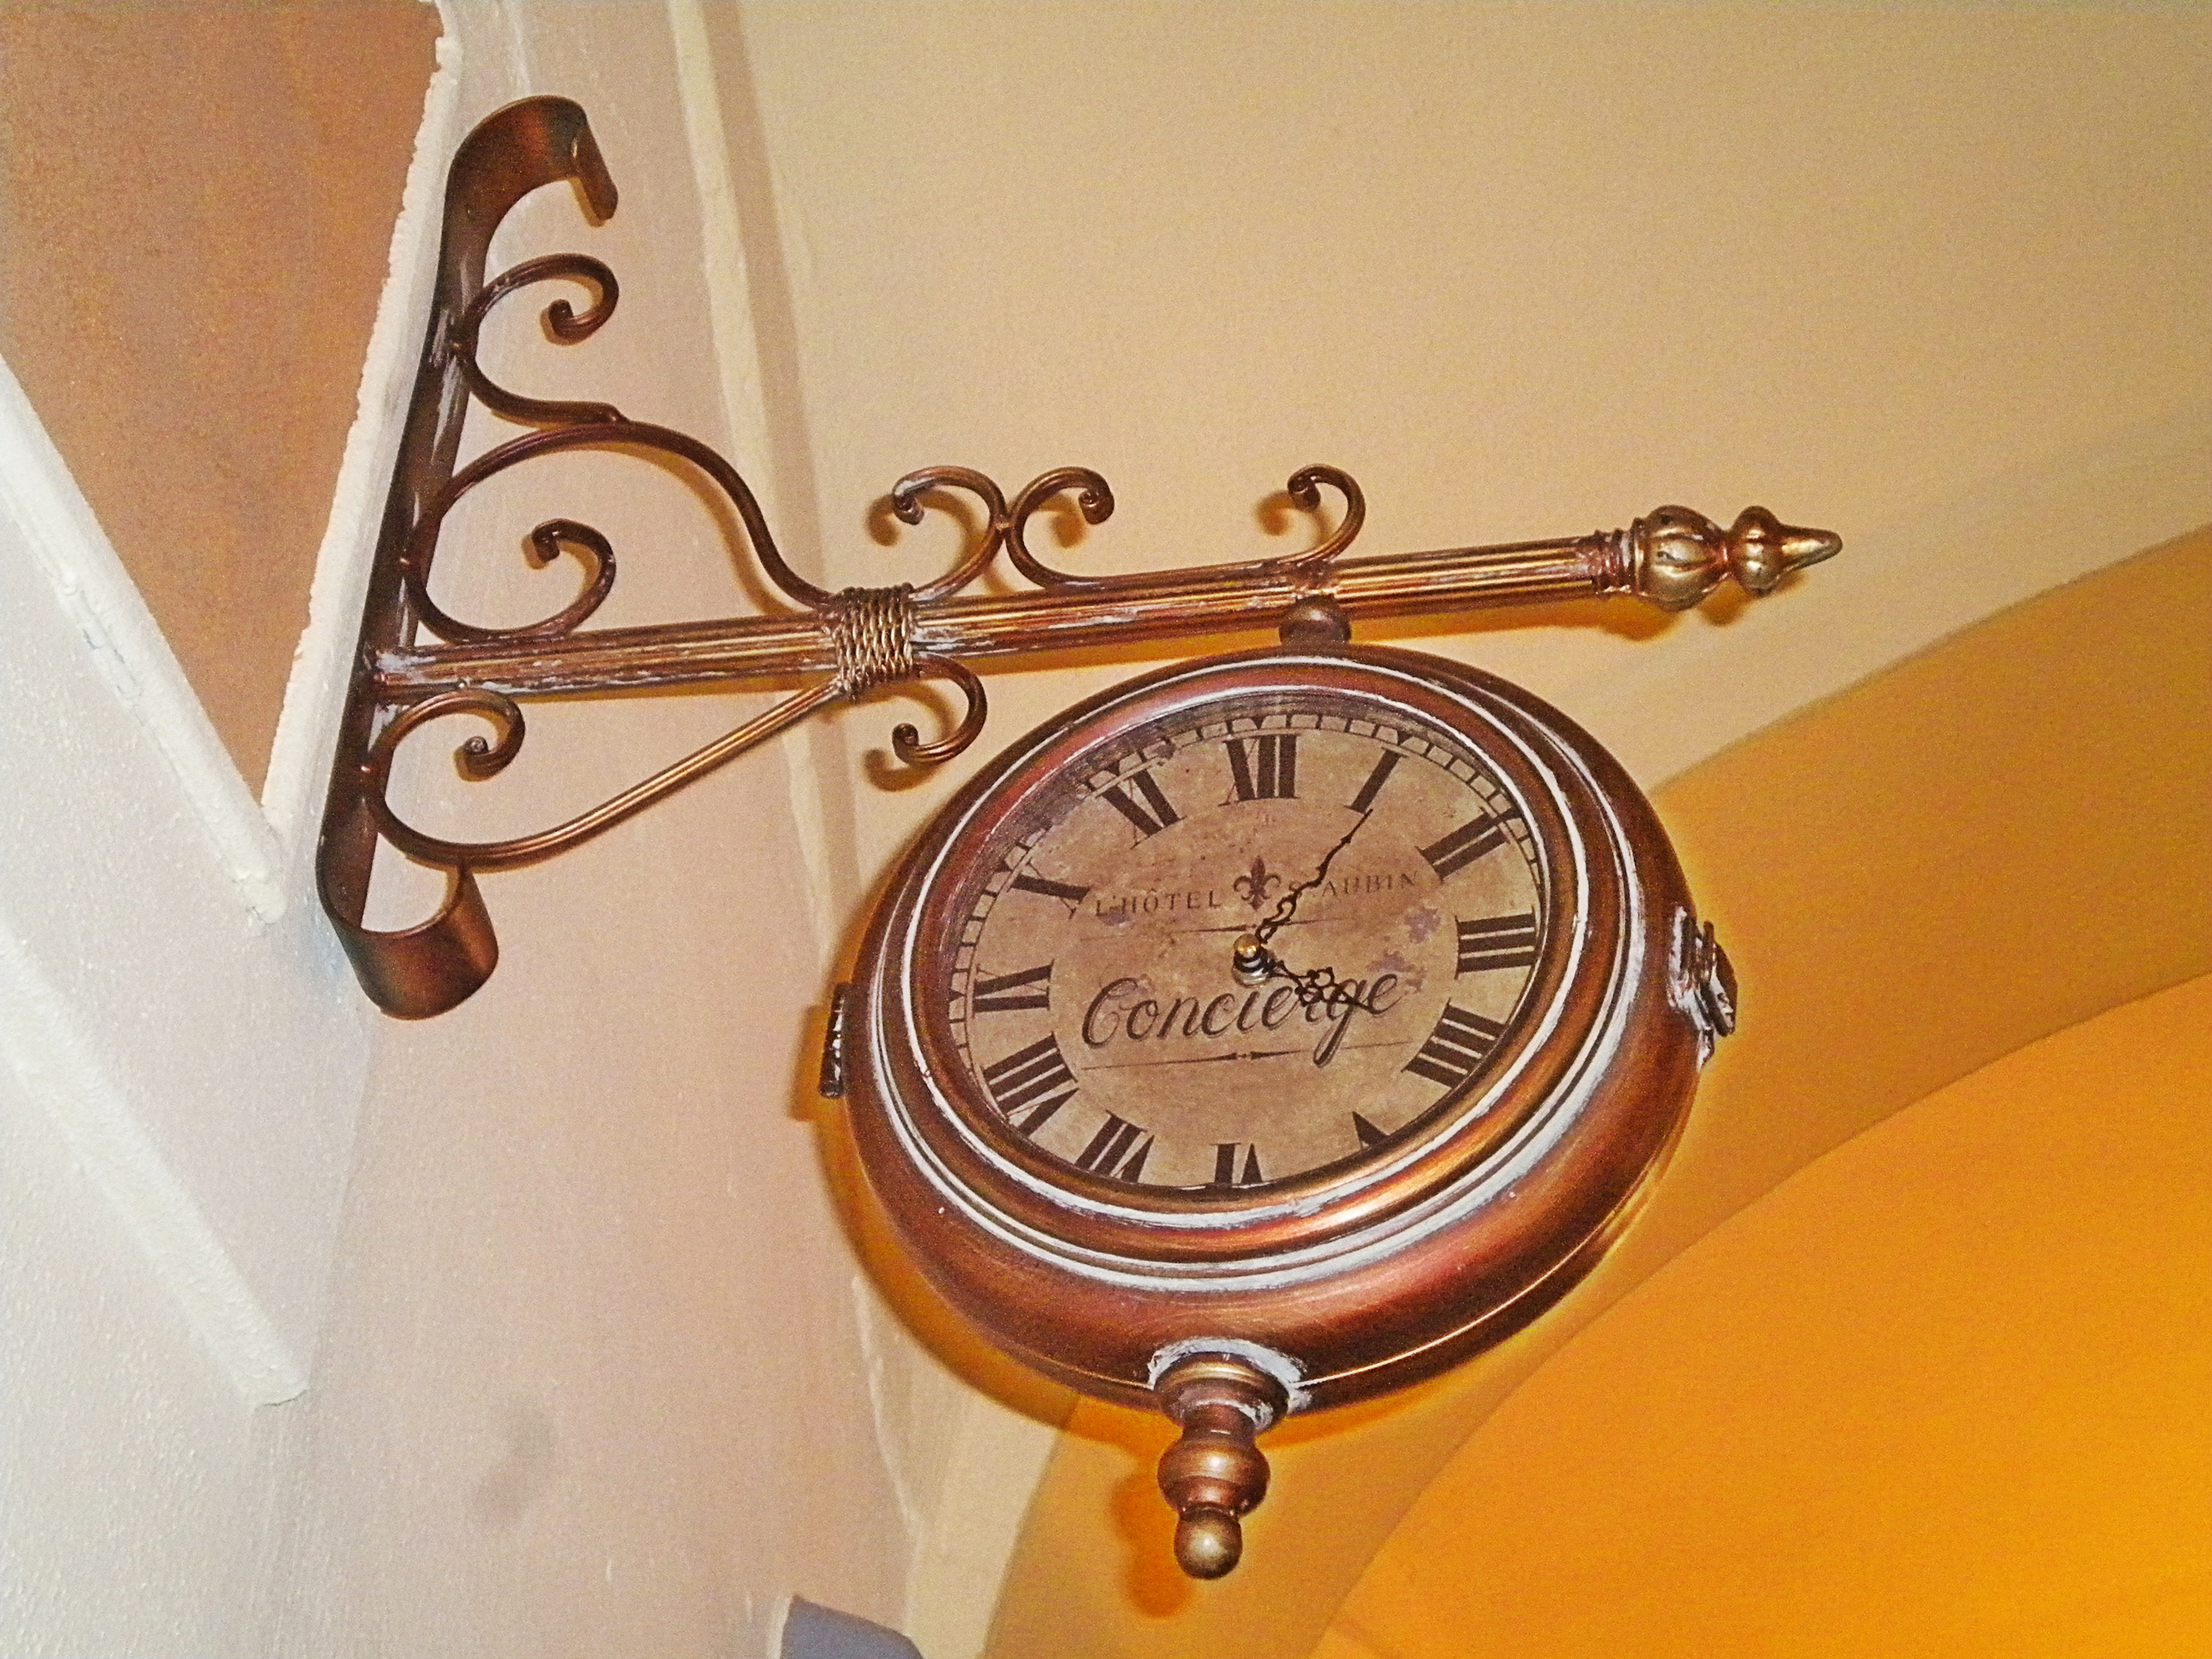 File:Old clock in Caffe' Le Poste.jpg - Wikimedia Commons